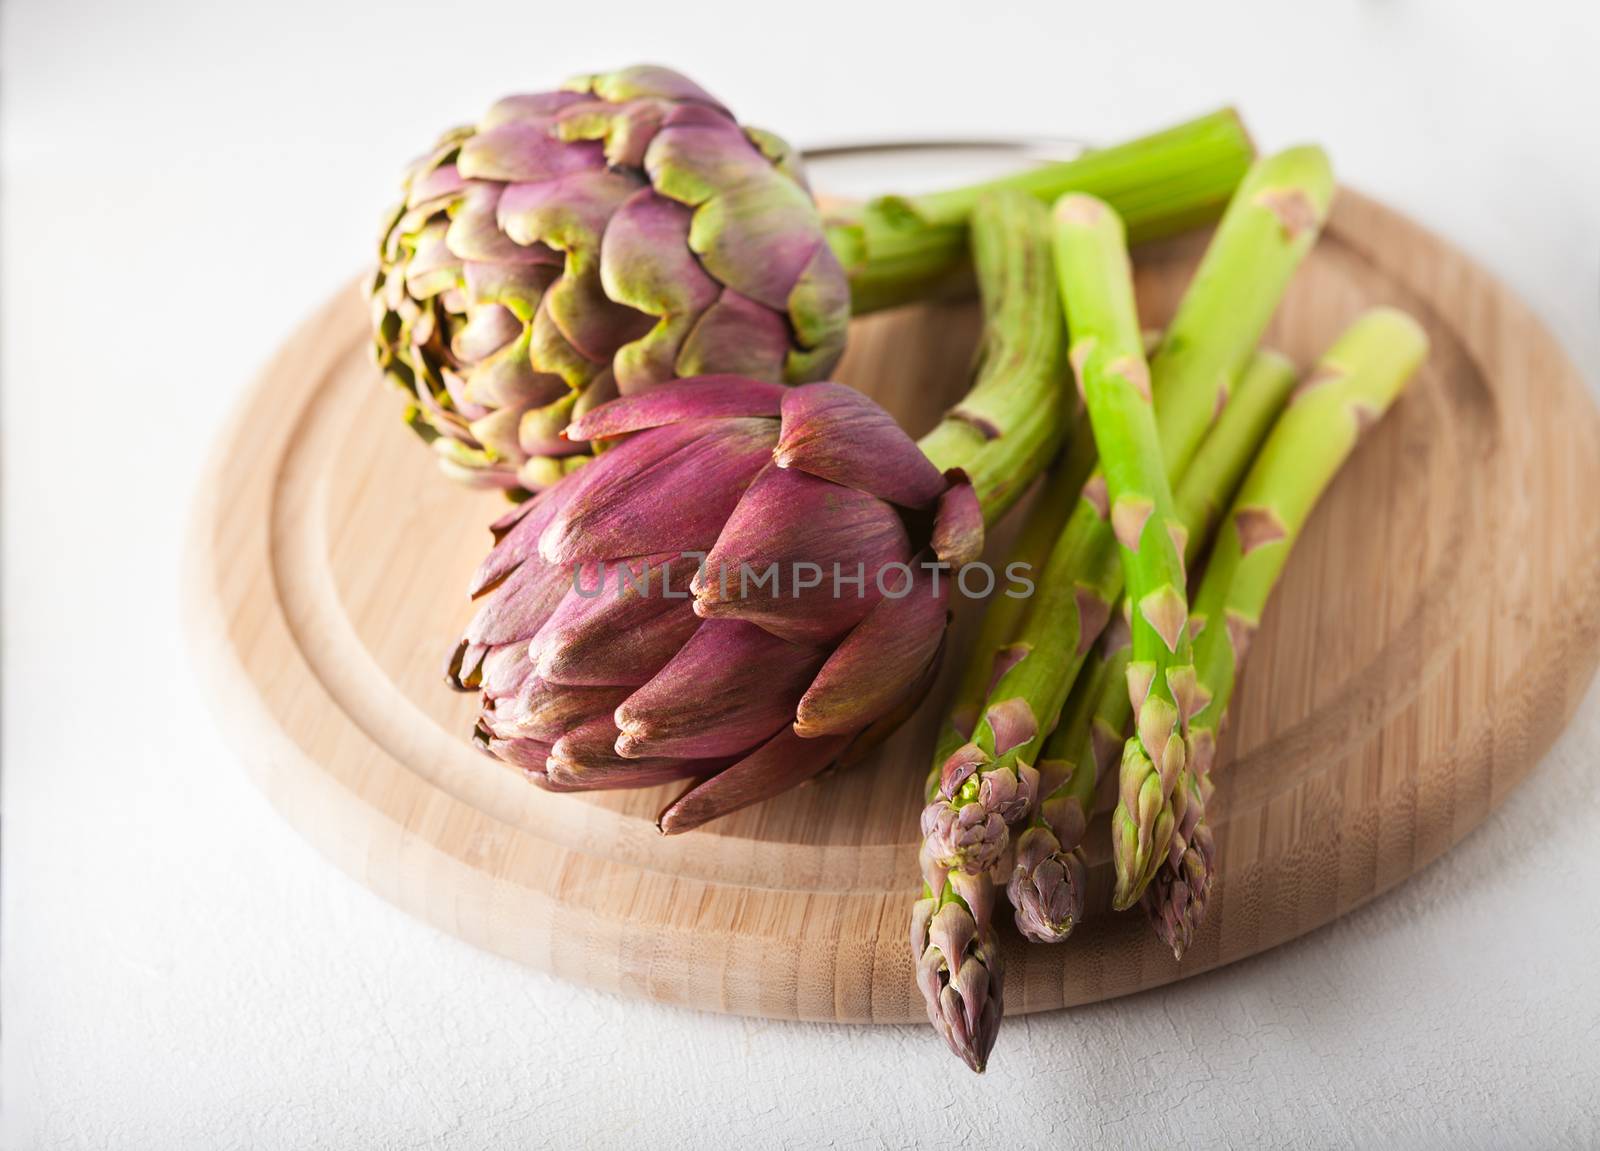 Artichokes and asparagus by supercat67